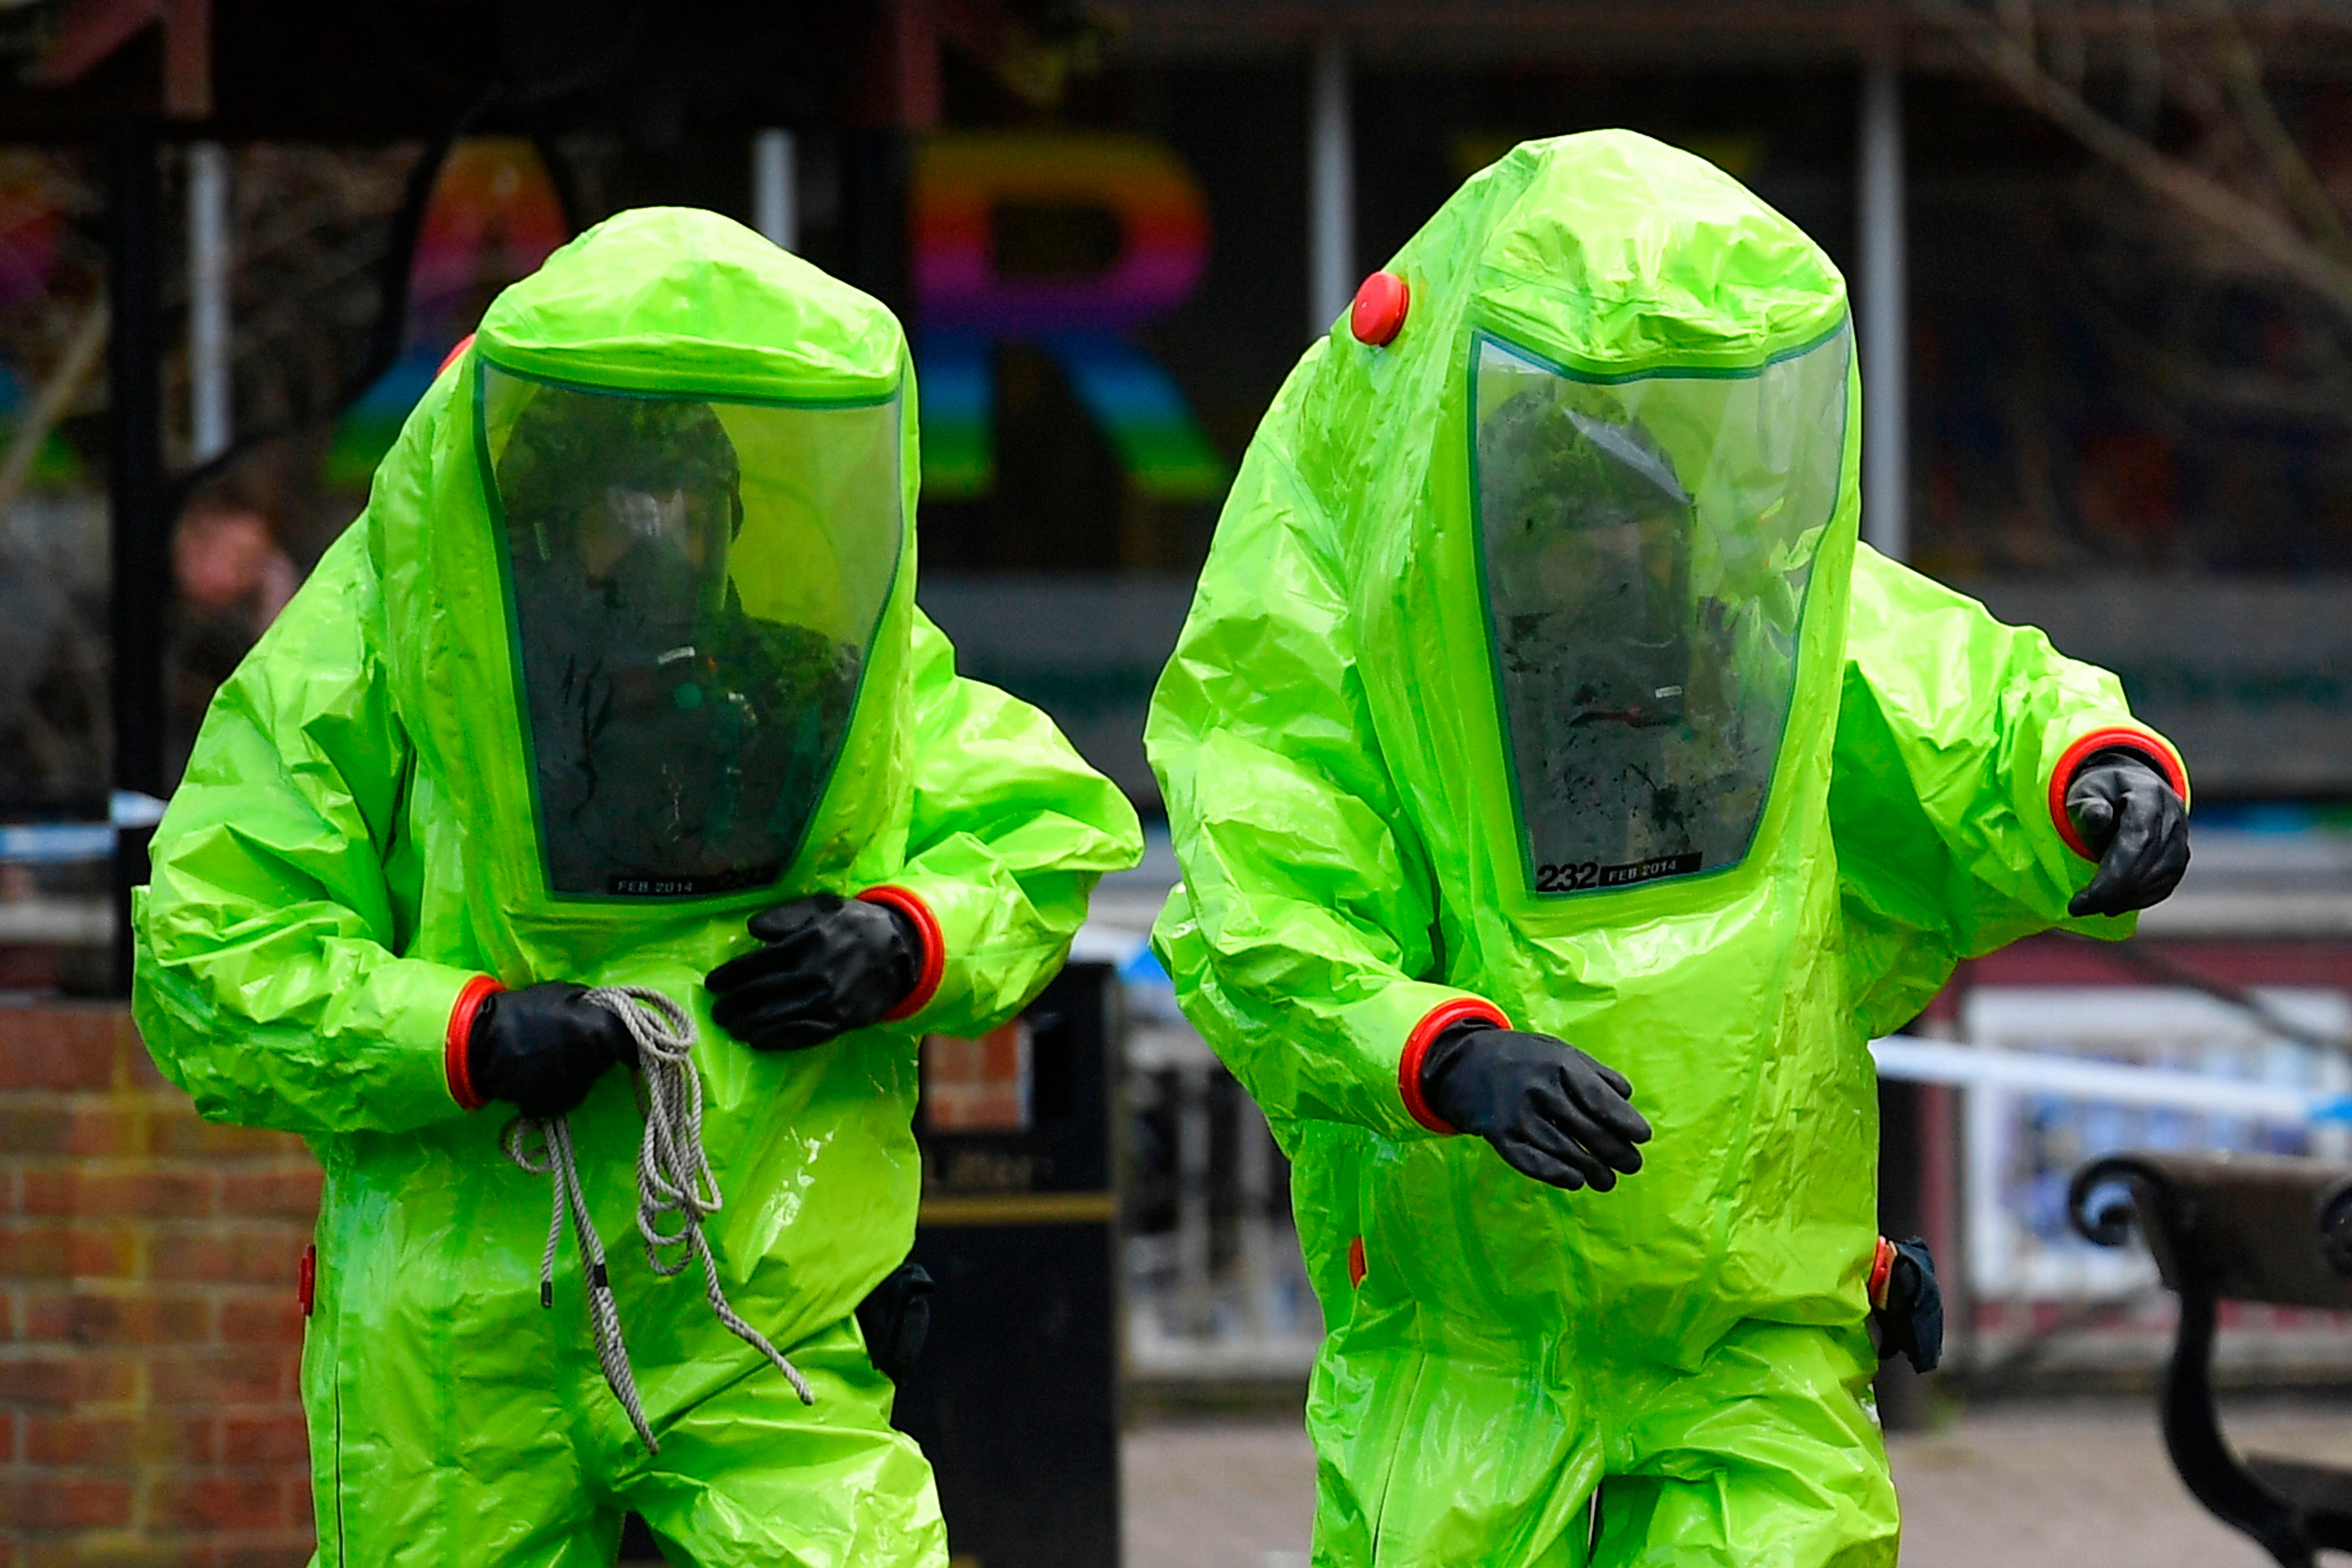 Emergency services personnel in biohazard suits investigate the Salisbury poisonings